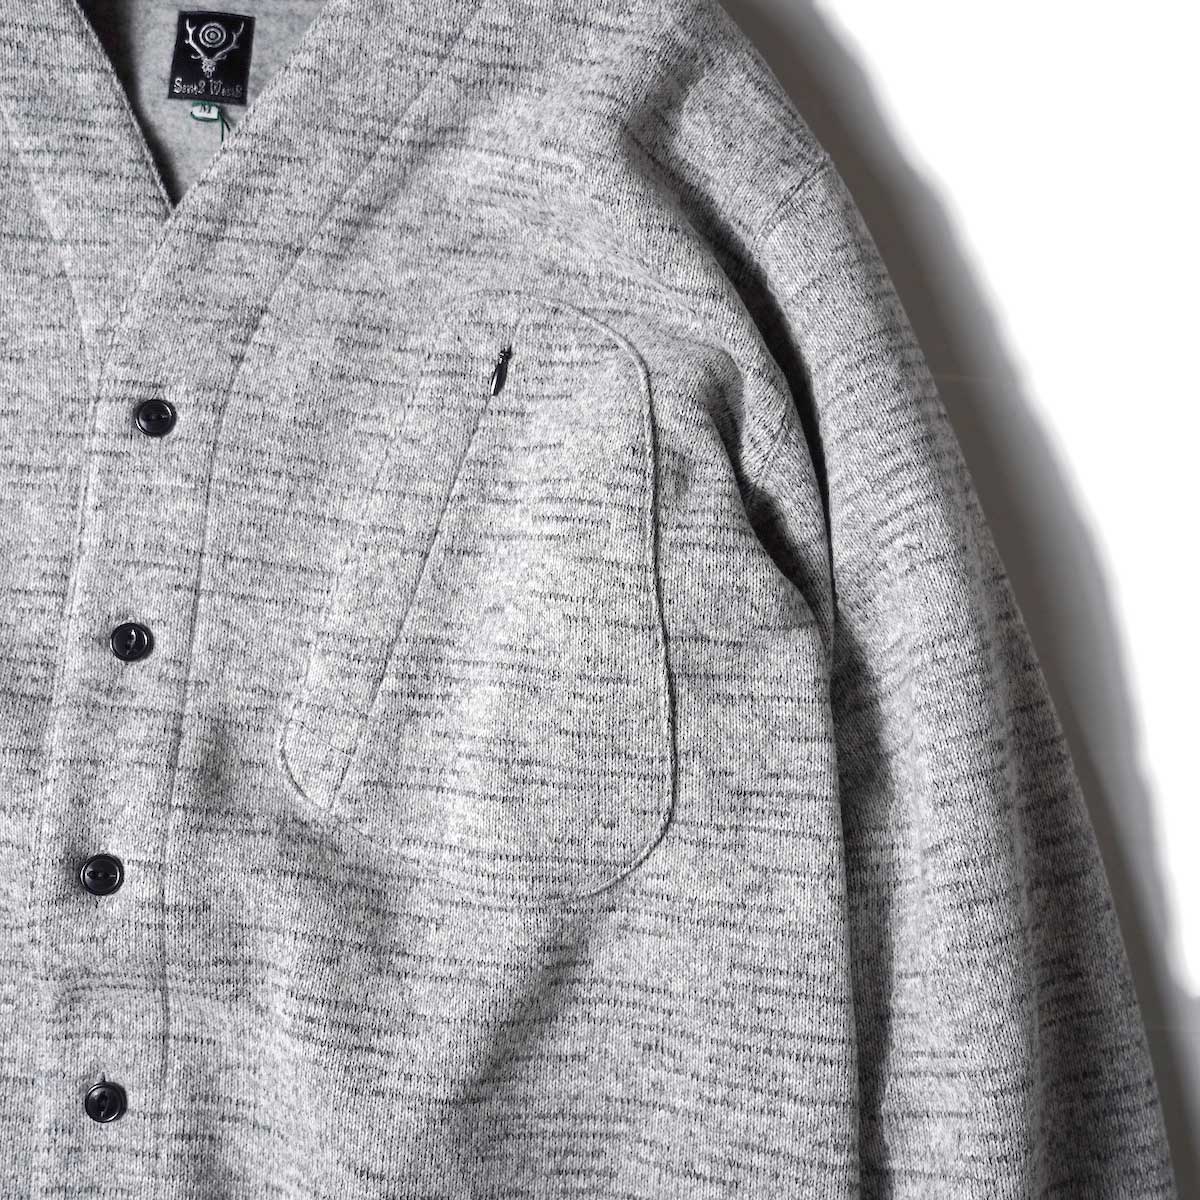 South2 West8 / Scouting Shirt - POLARTEC Fleece Lined Jersey (Grey)ポケット